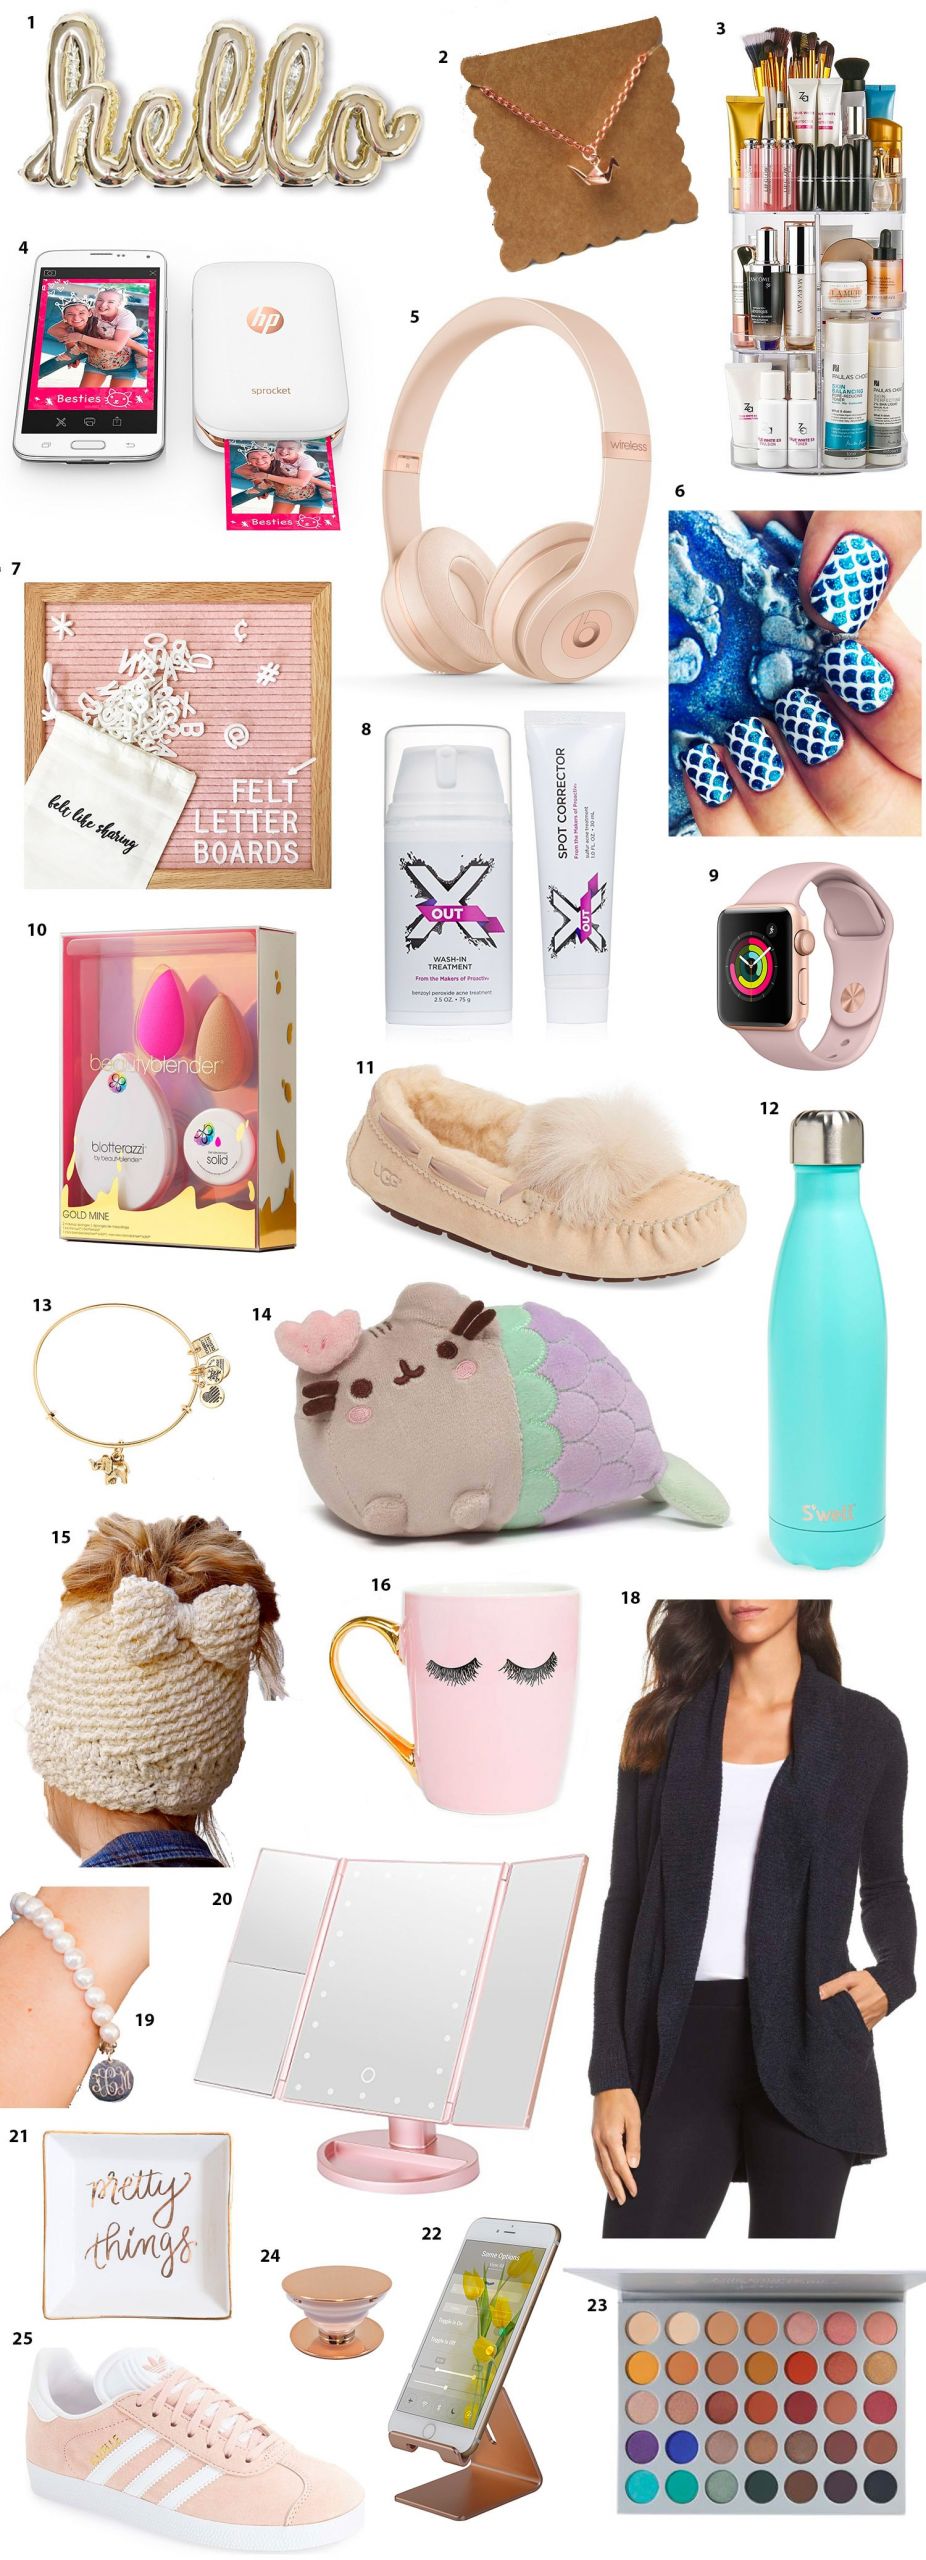 Christmas Gift Ideas For Teenage Girlfriend
 Top Gifts for Teens This Christmas